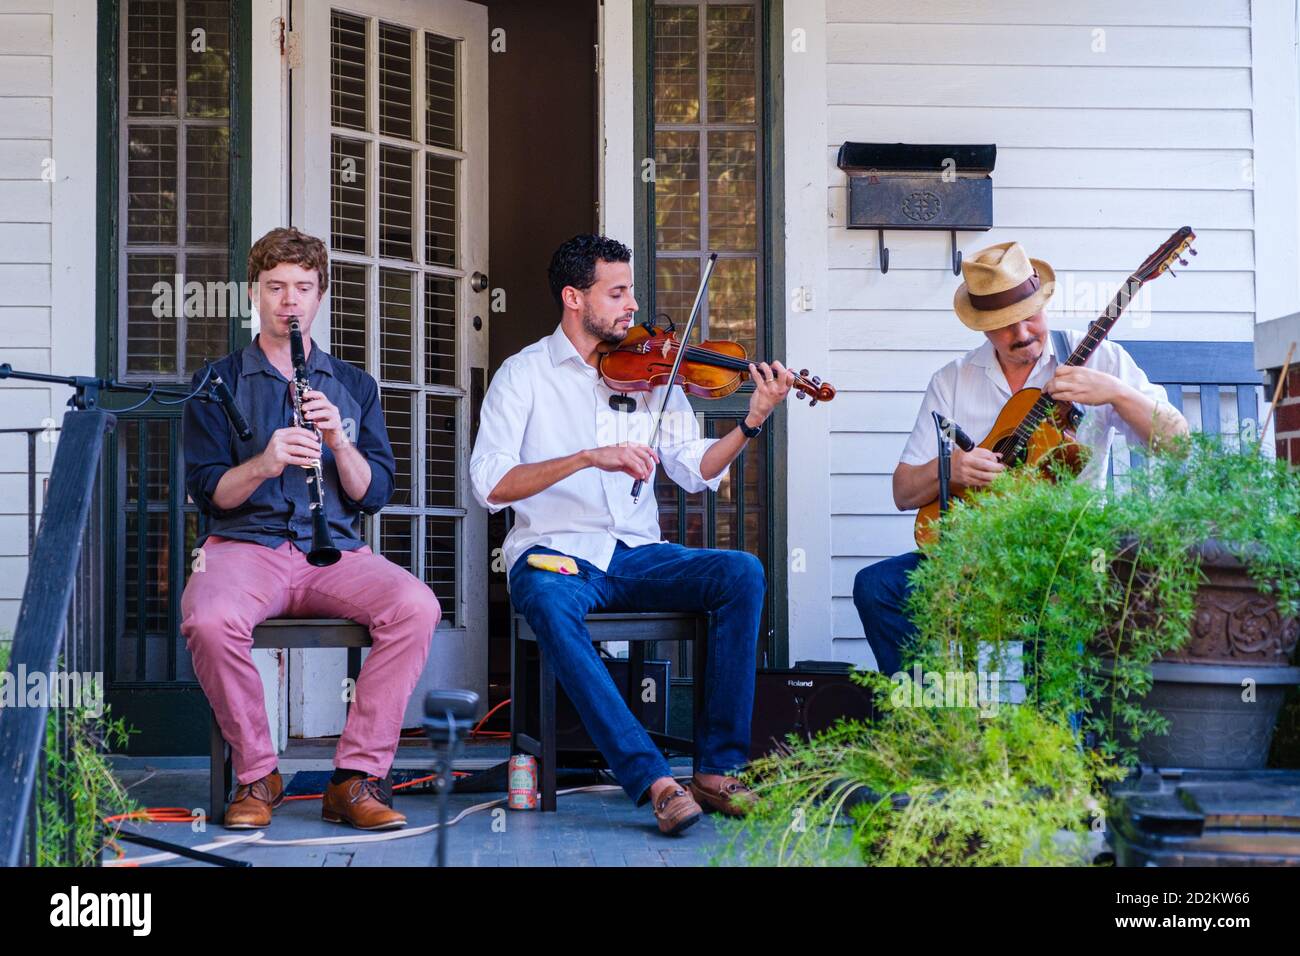 New Orleans, Louisiana/USA - 9/26/2020: Gypsy Jazz Musicians at Front Porch Concert in Uptown Neighborhood Stock Photo